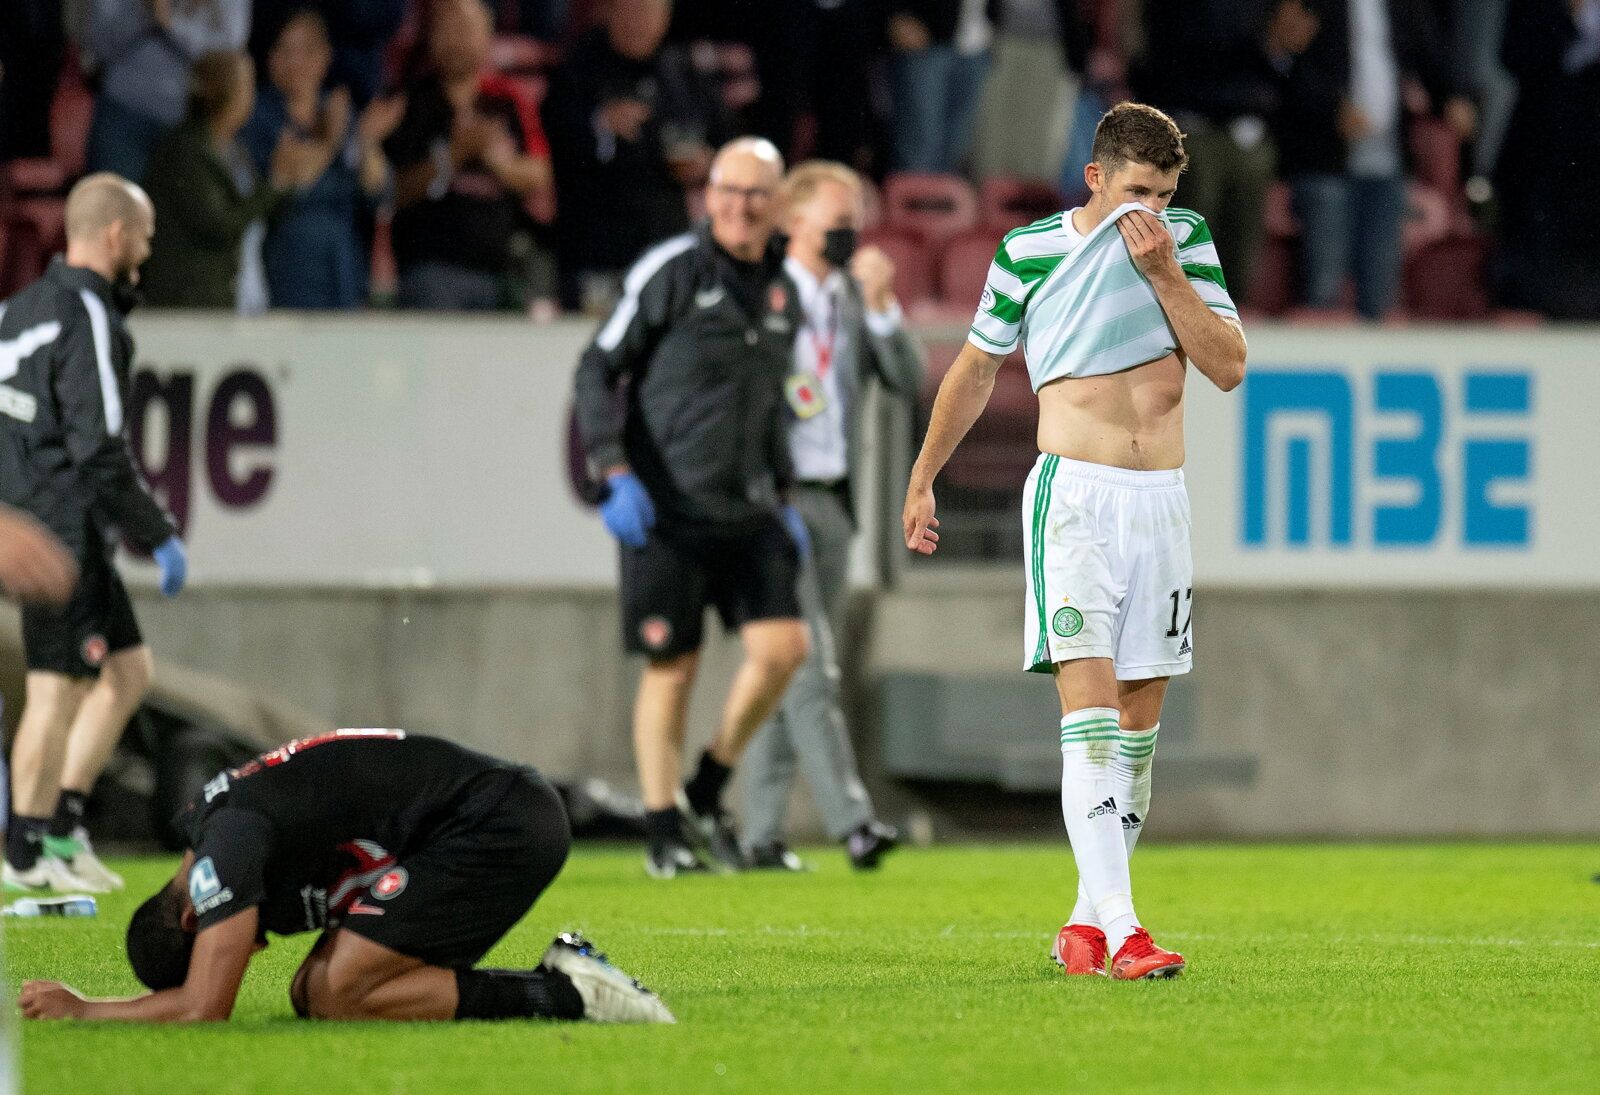 Soccer Football - Champions League - Second Qualifying Round - Second Leg - FC Midtjylland v Celtic - MCH Arena, Herning, Denmark - July 28, 2021 Celtic's Ryan Christie looks dejected after the match Bo Amstrup/Ritzau Scanpix via REUTERS      ATTENTION EDITORS - THIS IMAGE WAS PROVIDED BY A THIRD PARTY. DENMARK OUT. NO COMMERCIAL OR EDITORIAL SALES IN DENMARK.